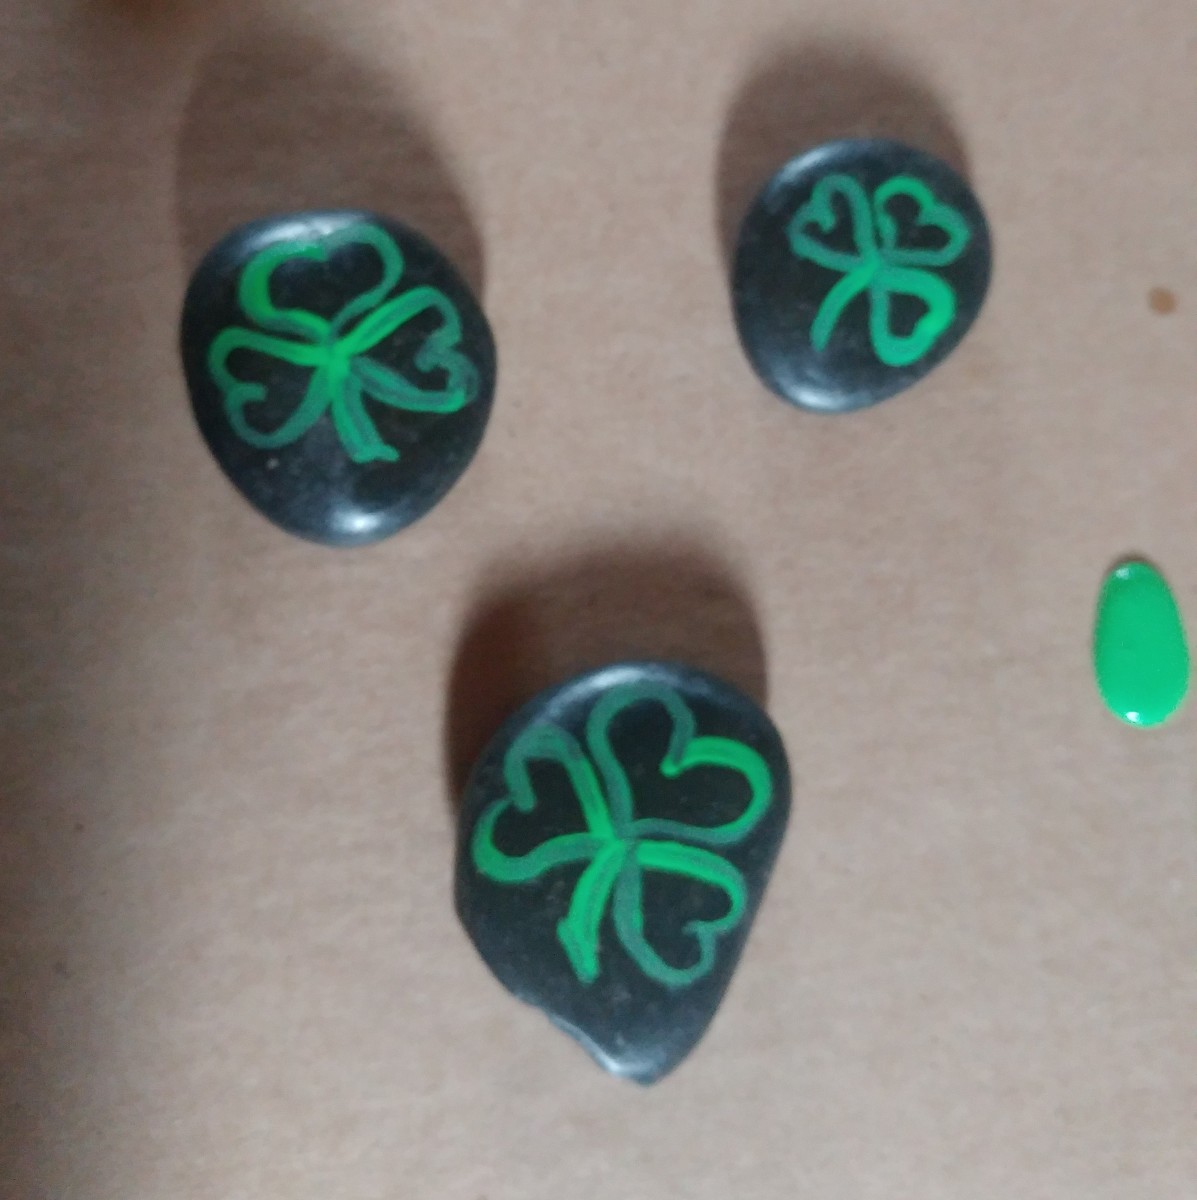 Draw the outline of shamrocks first.